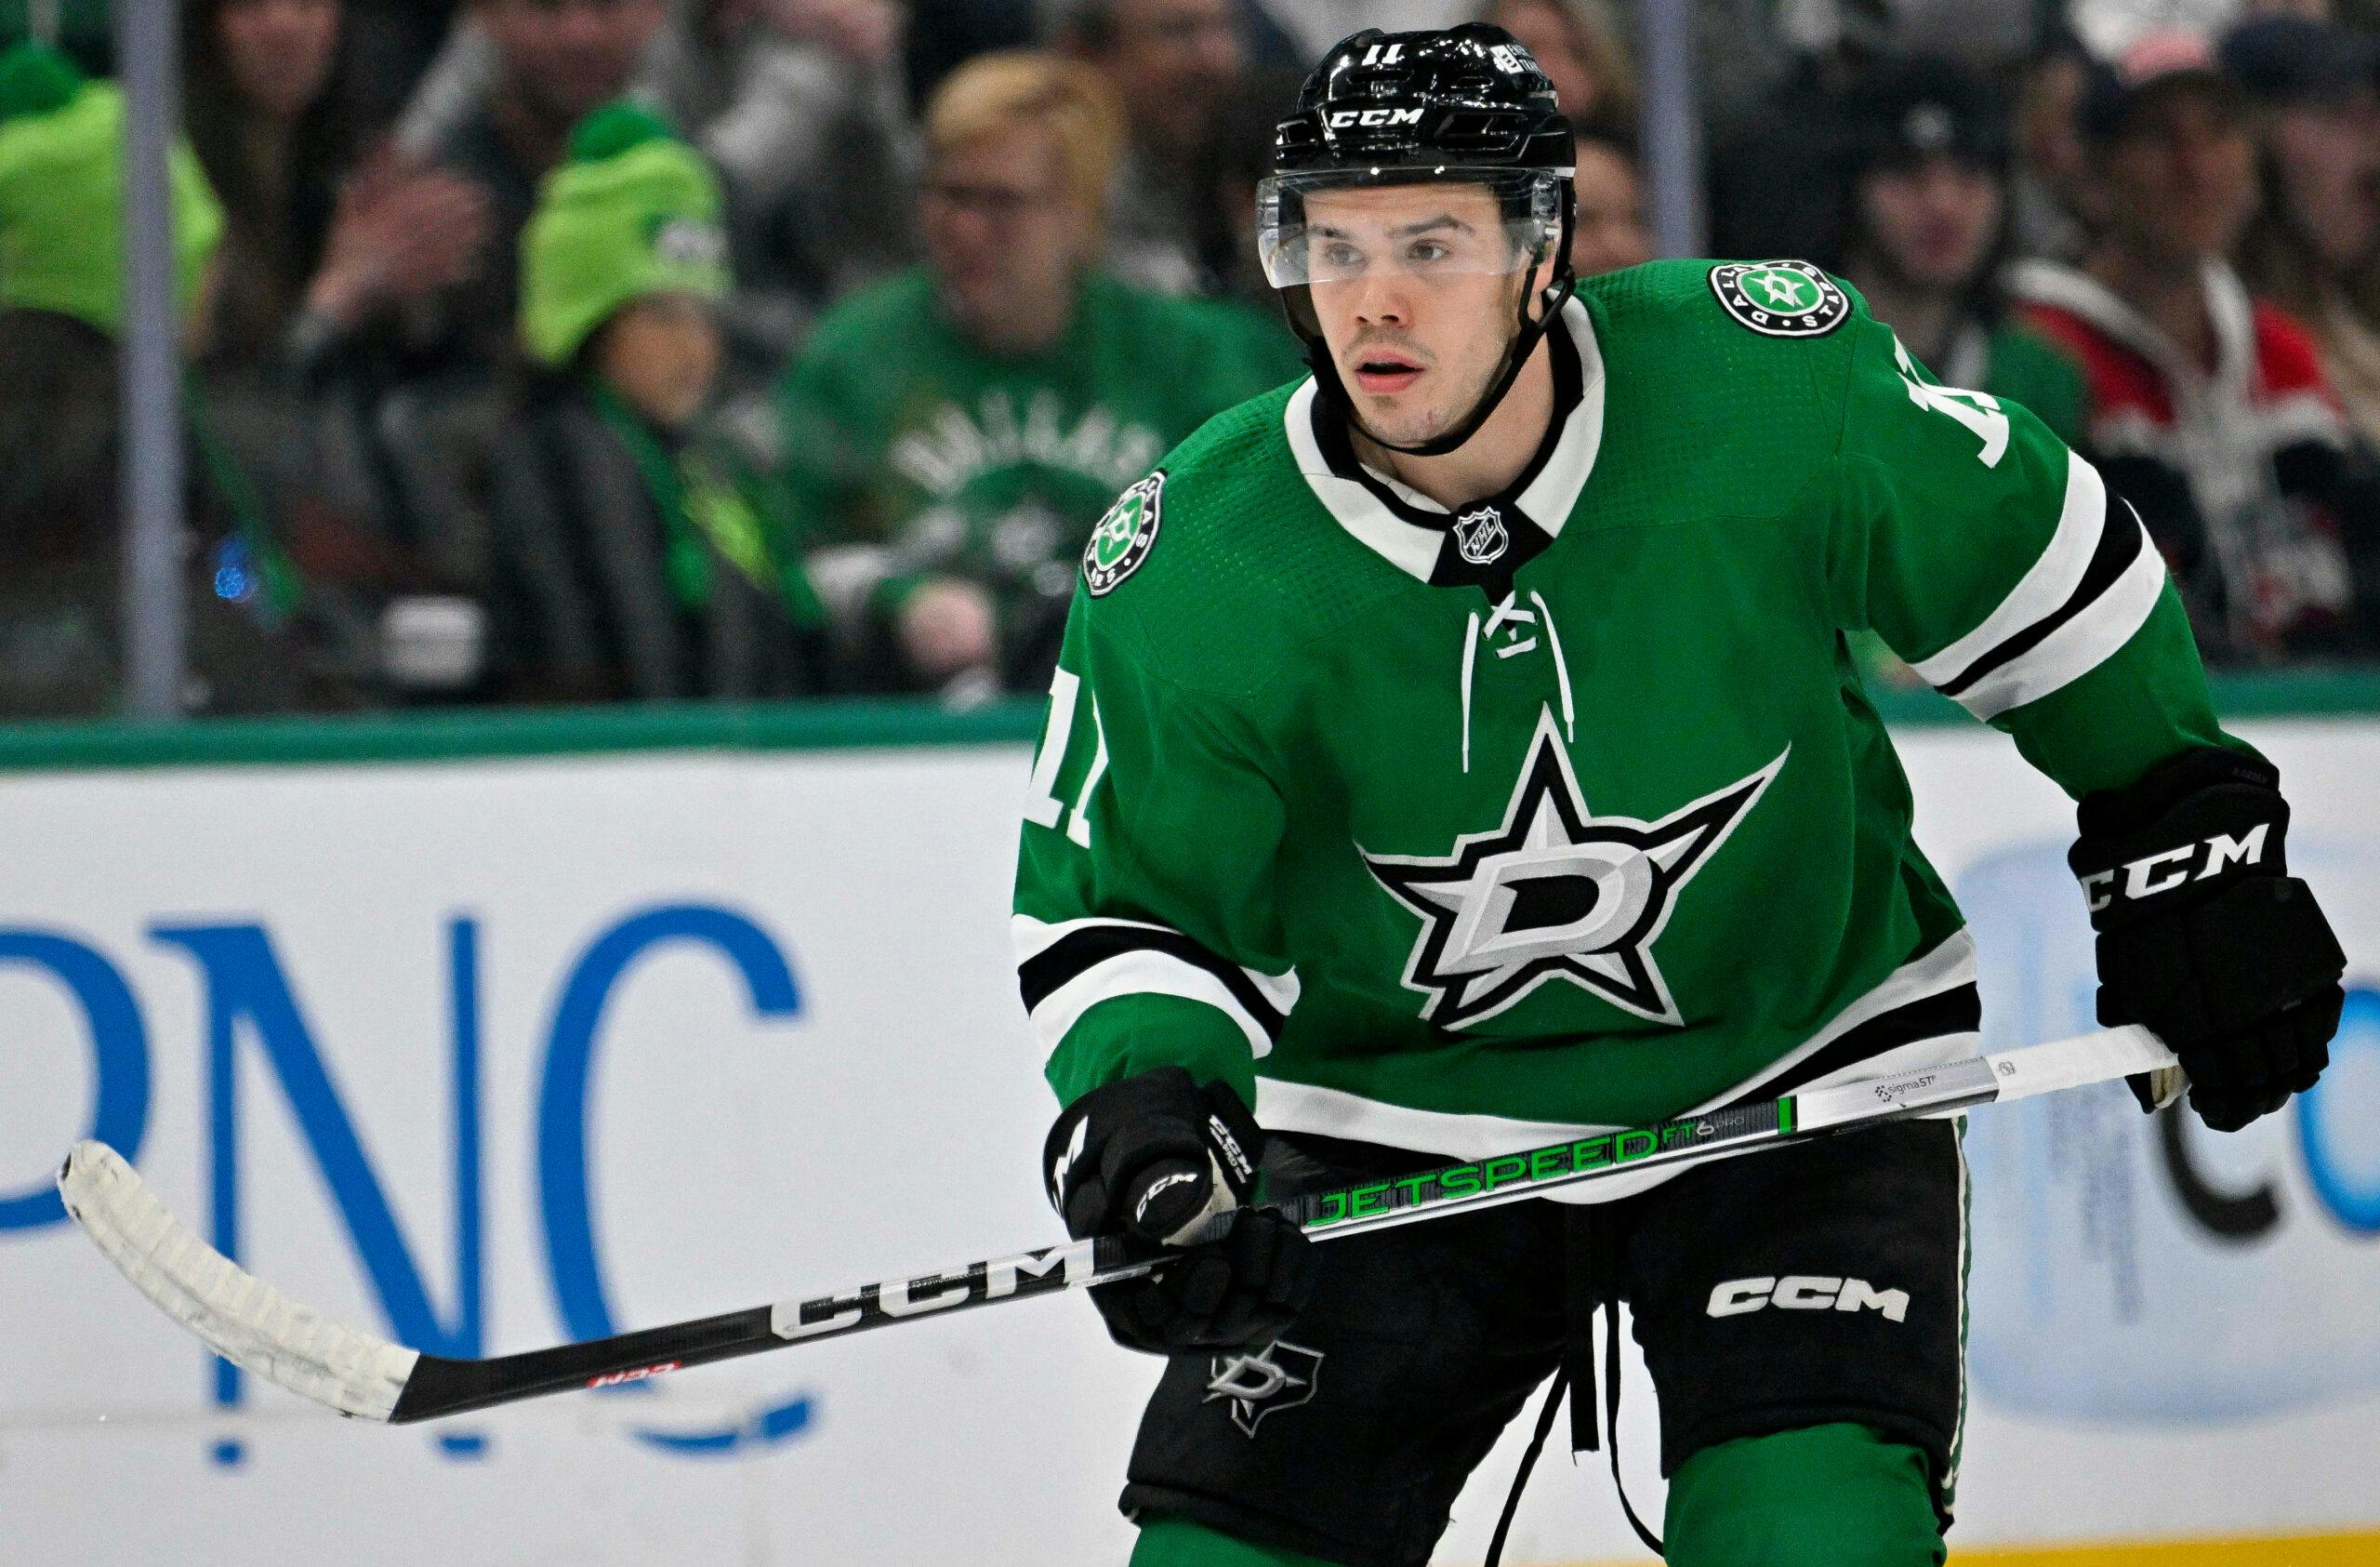 Top five rookies who could have the biggest impact during Stanley Cup Playoffs